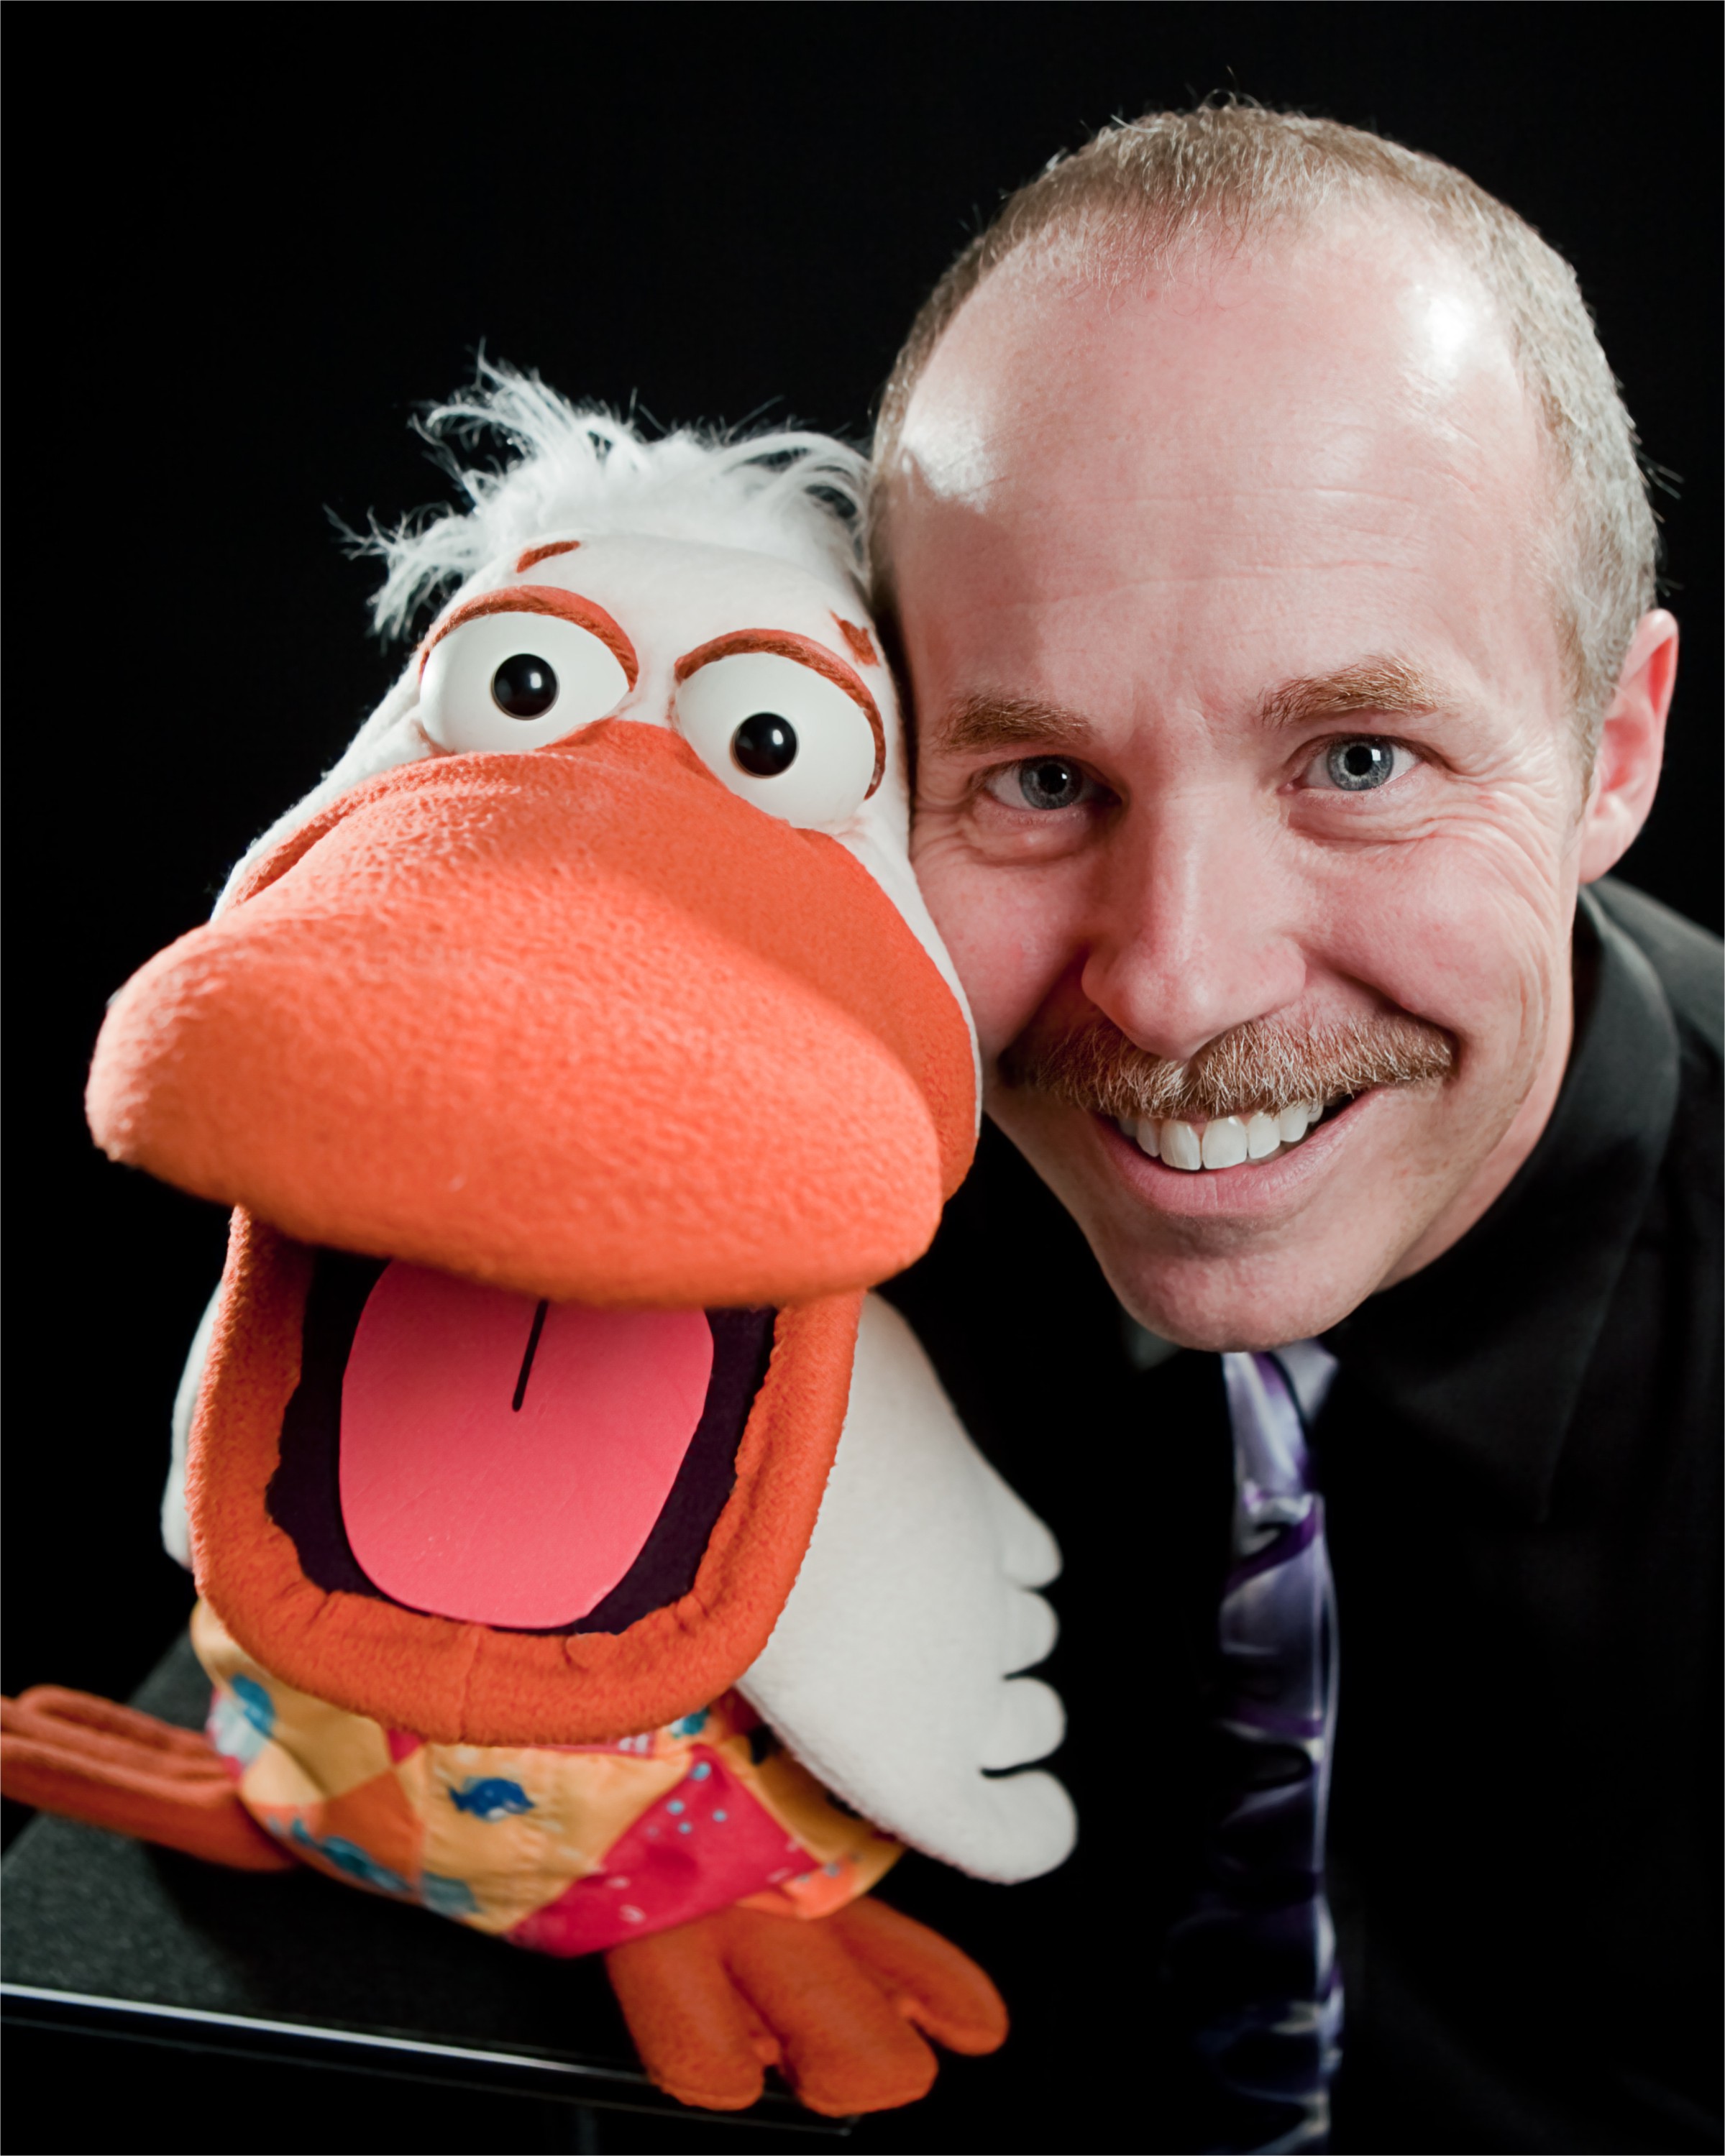 Ventriloquist Tom Crow and Duck Puppet